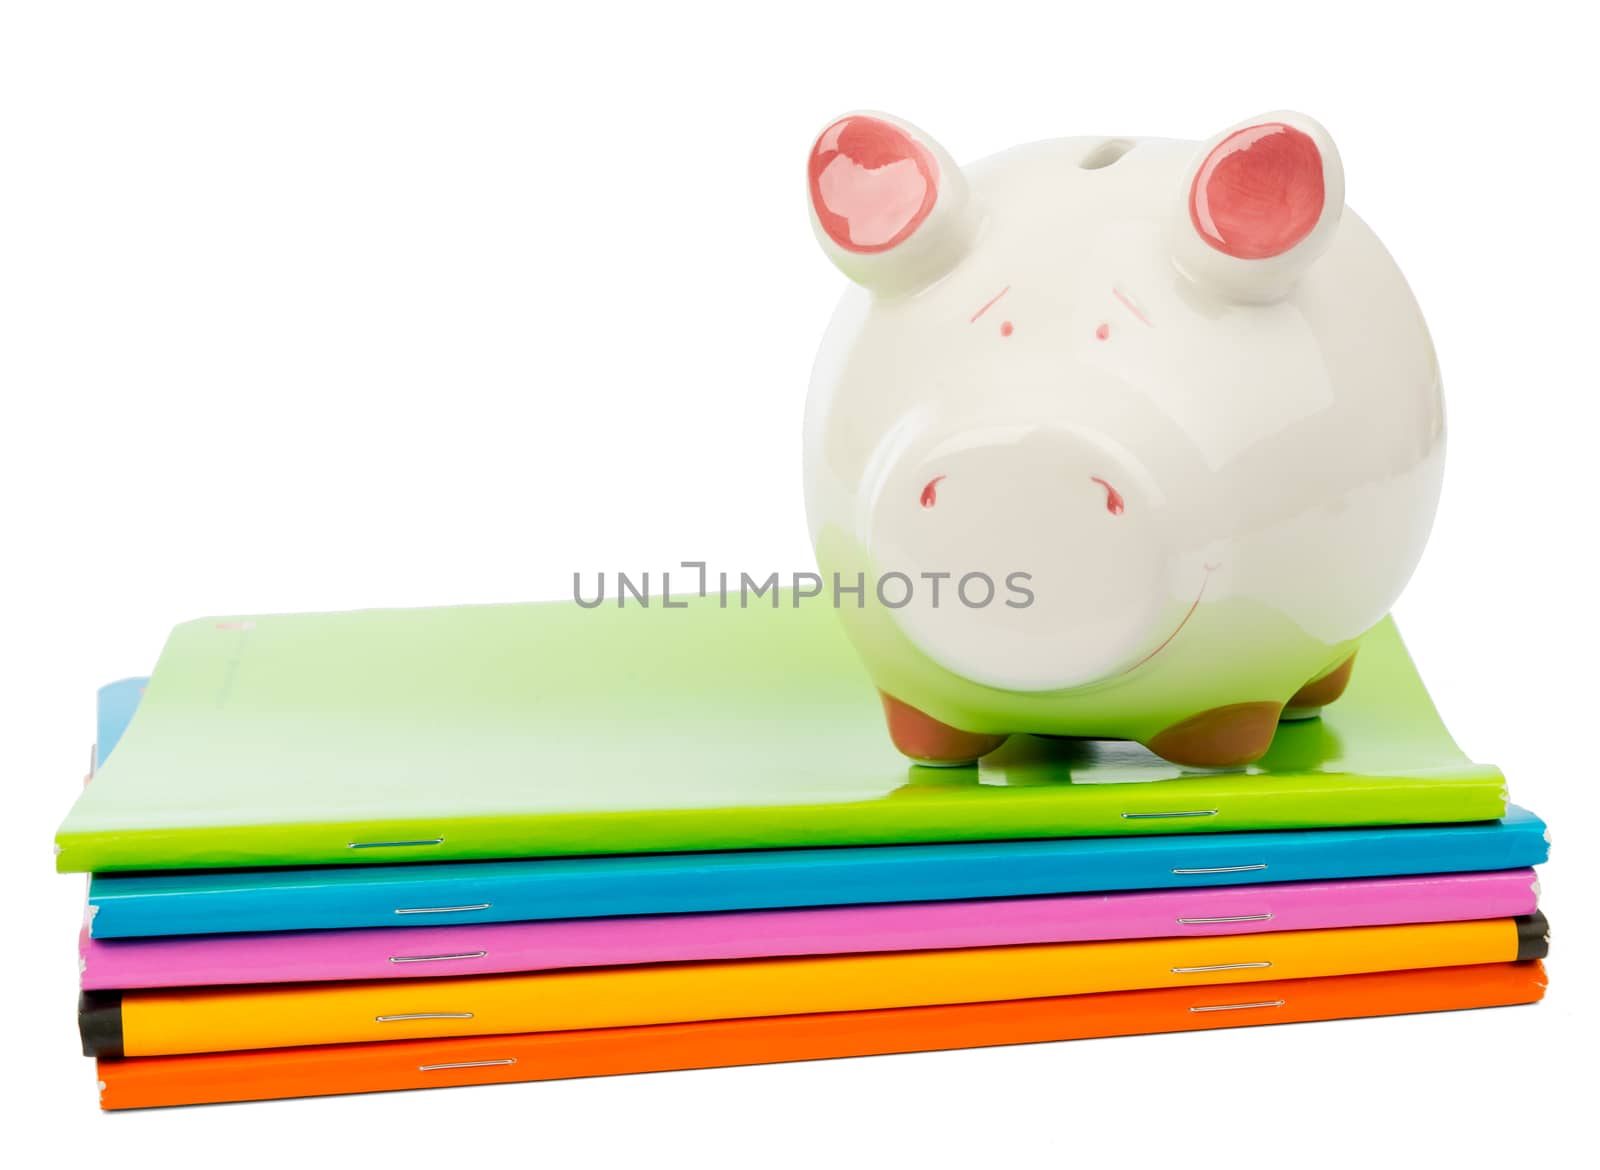 Piggy bank on pile of copybooks on isolated white background, front view